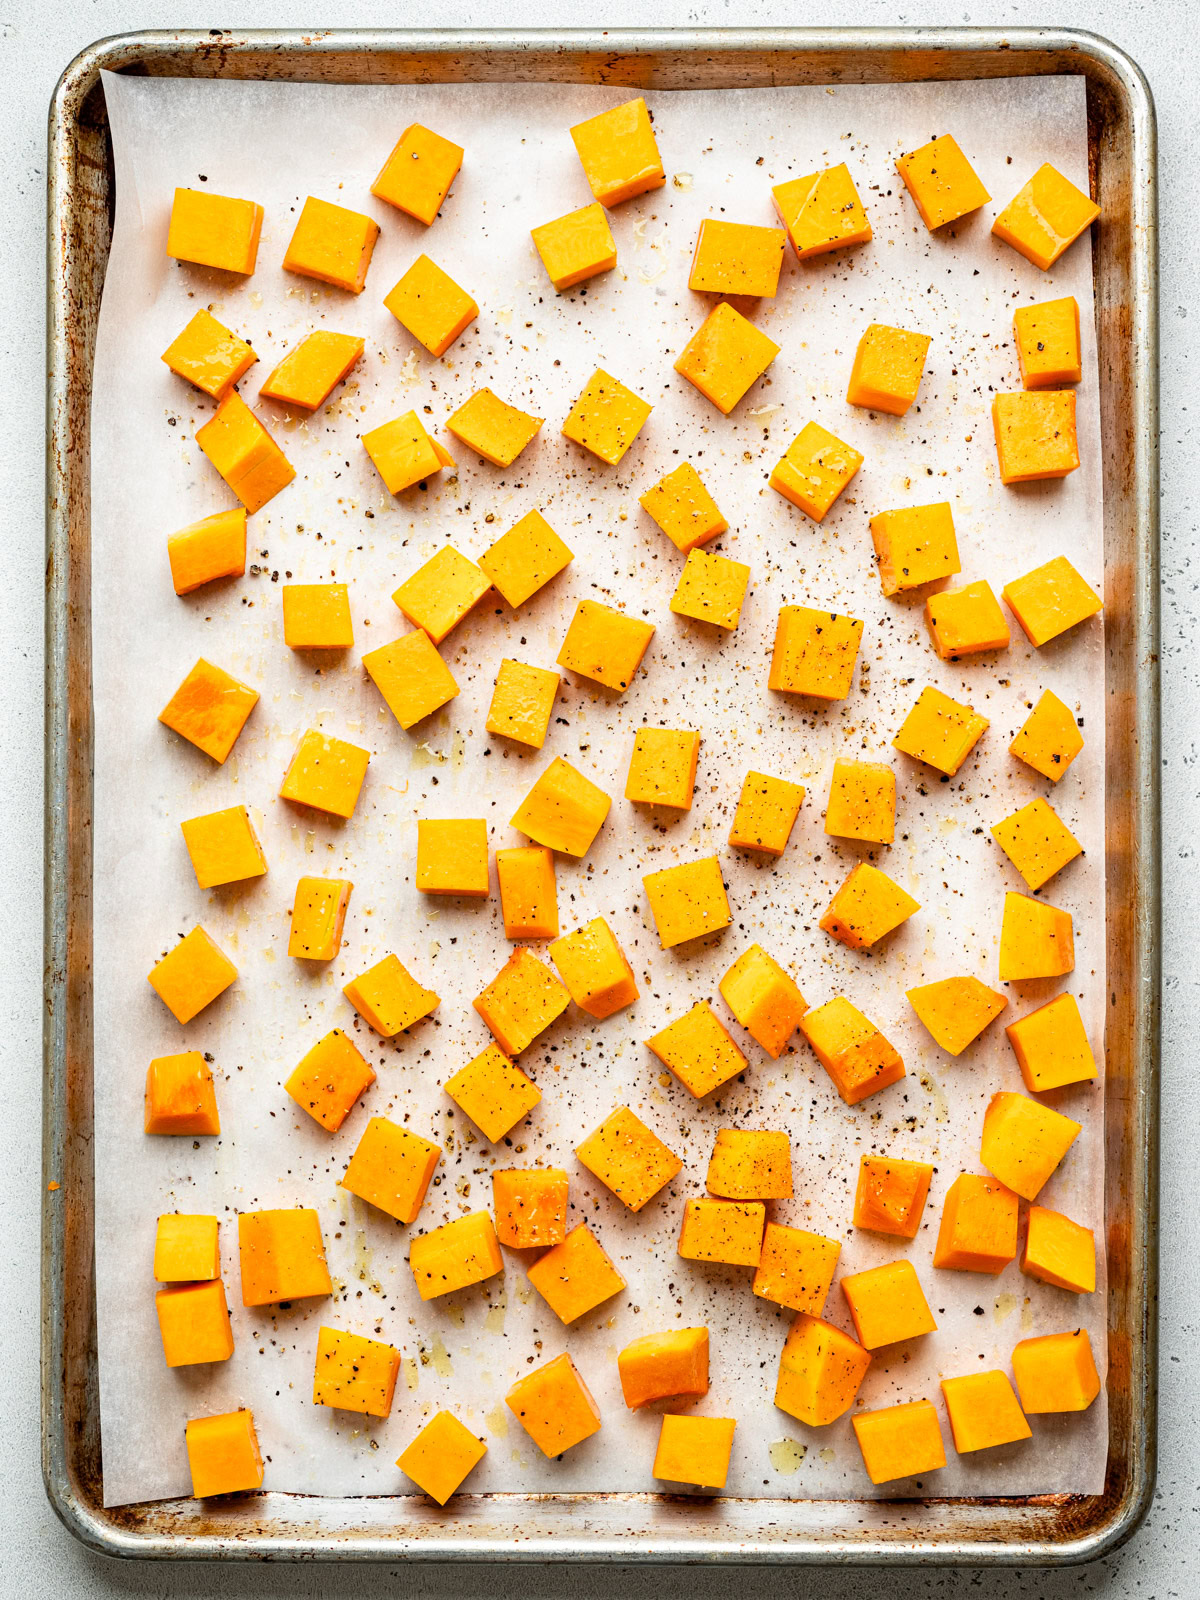 cubed butternut squash on sheet pan ready to be roasted